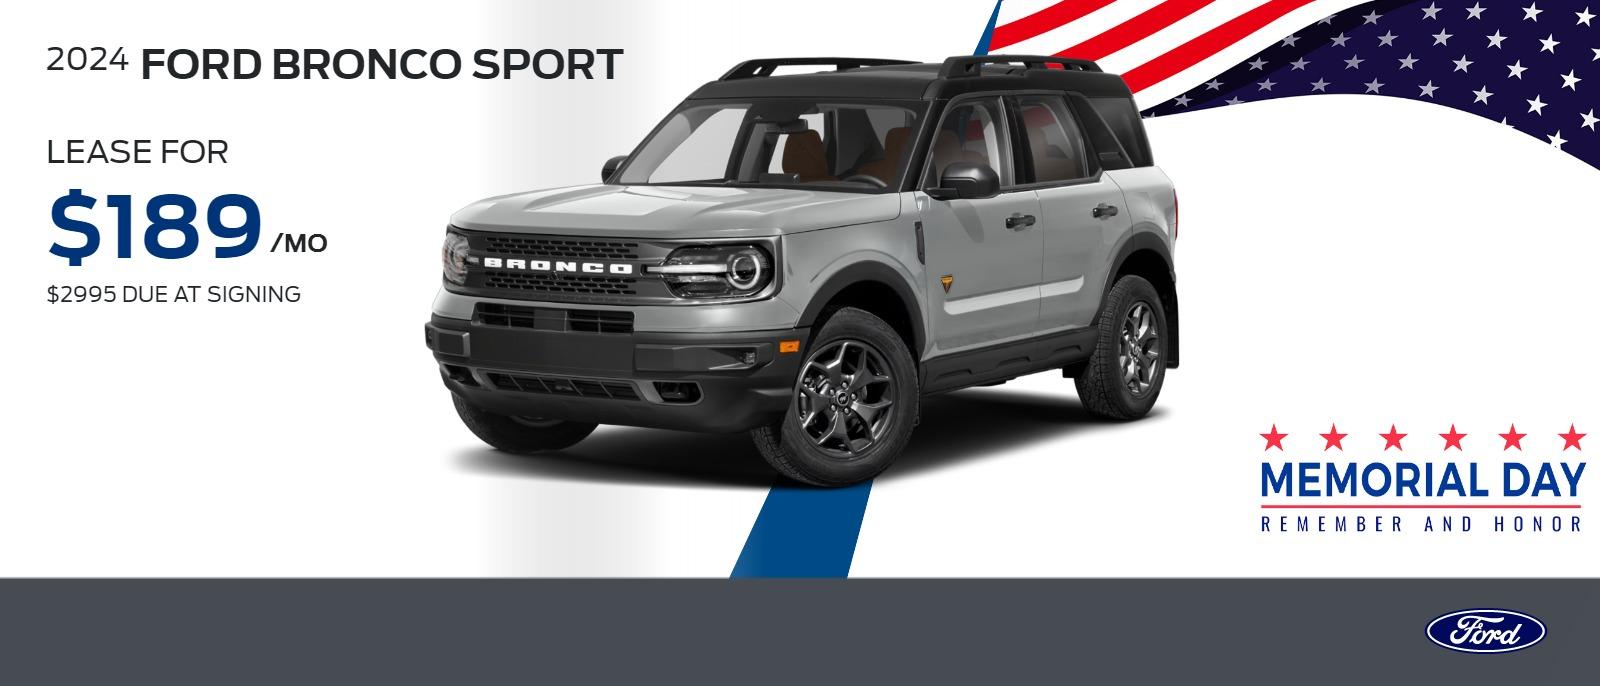 2024 Bronco Sport
$189 per month lease $2995 due at signing